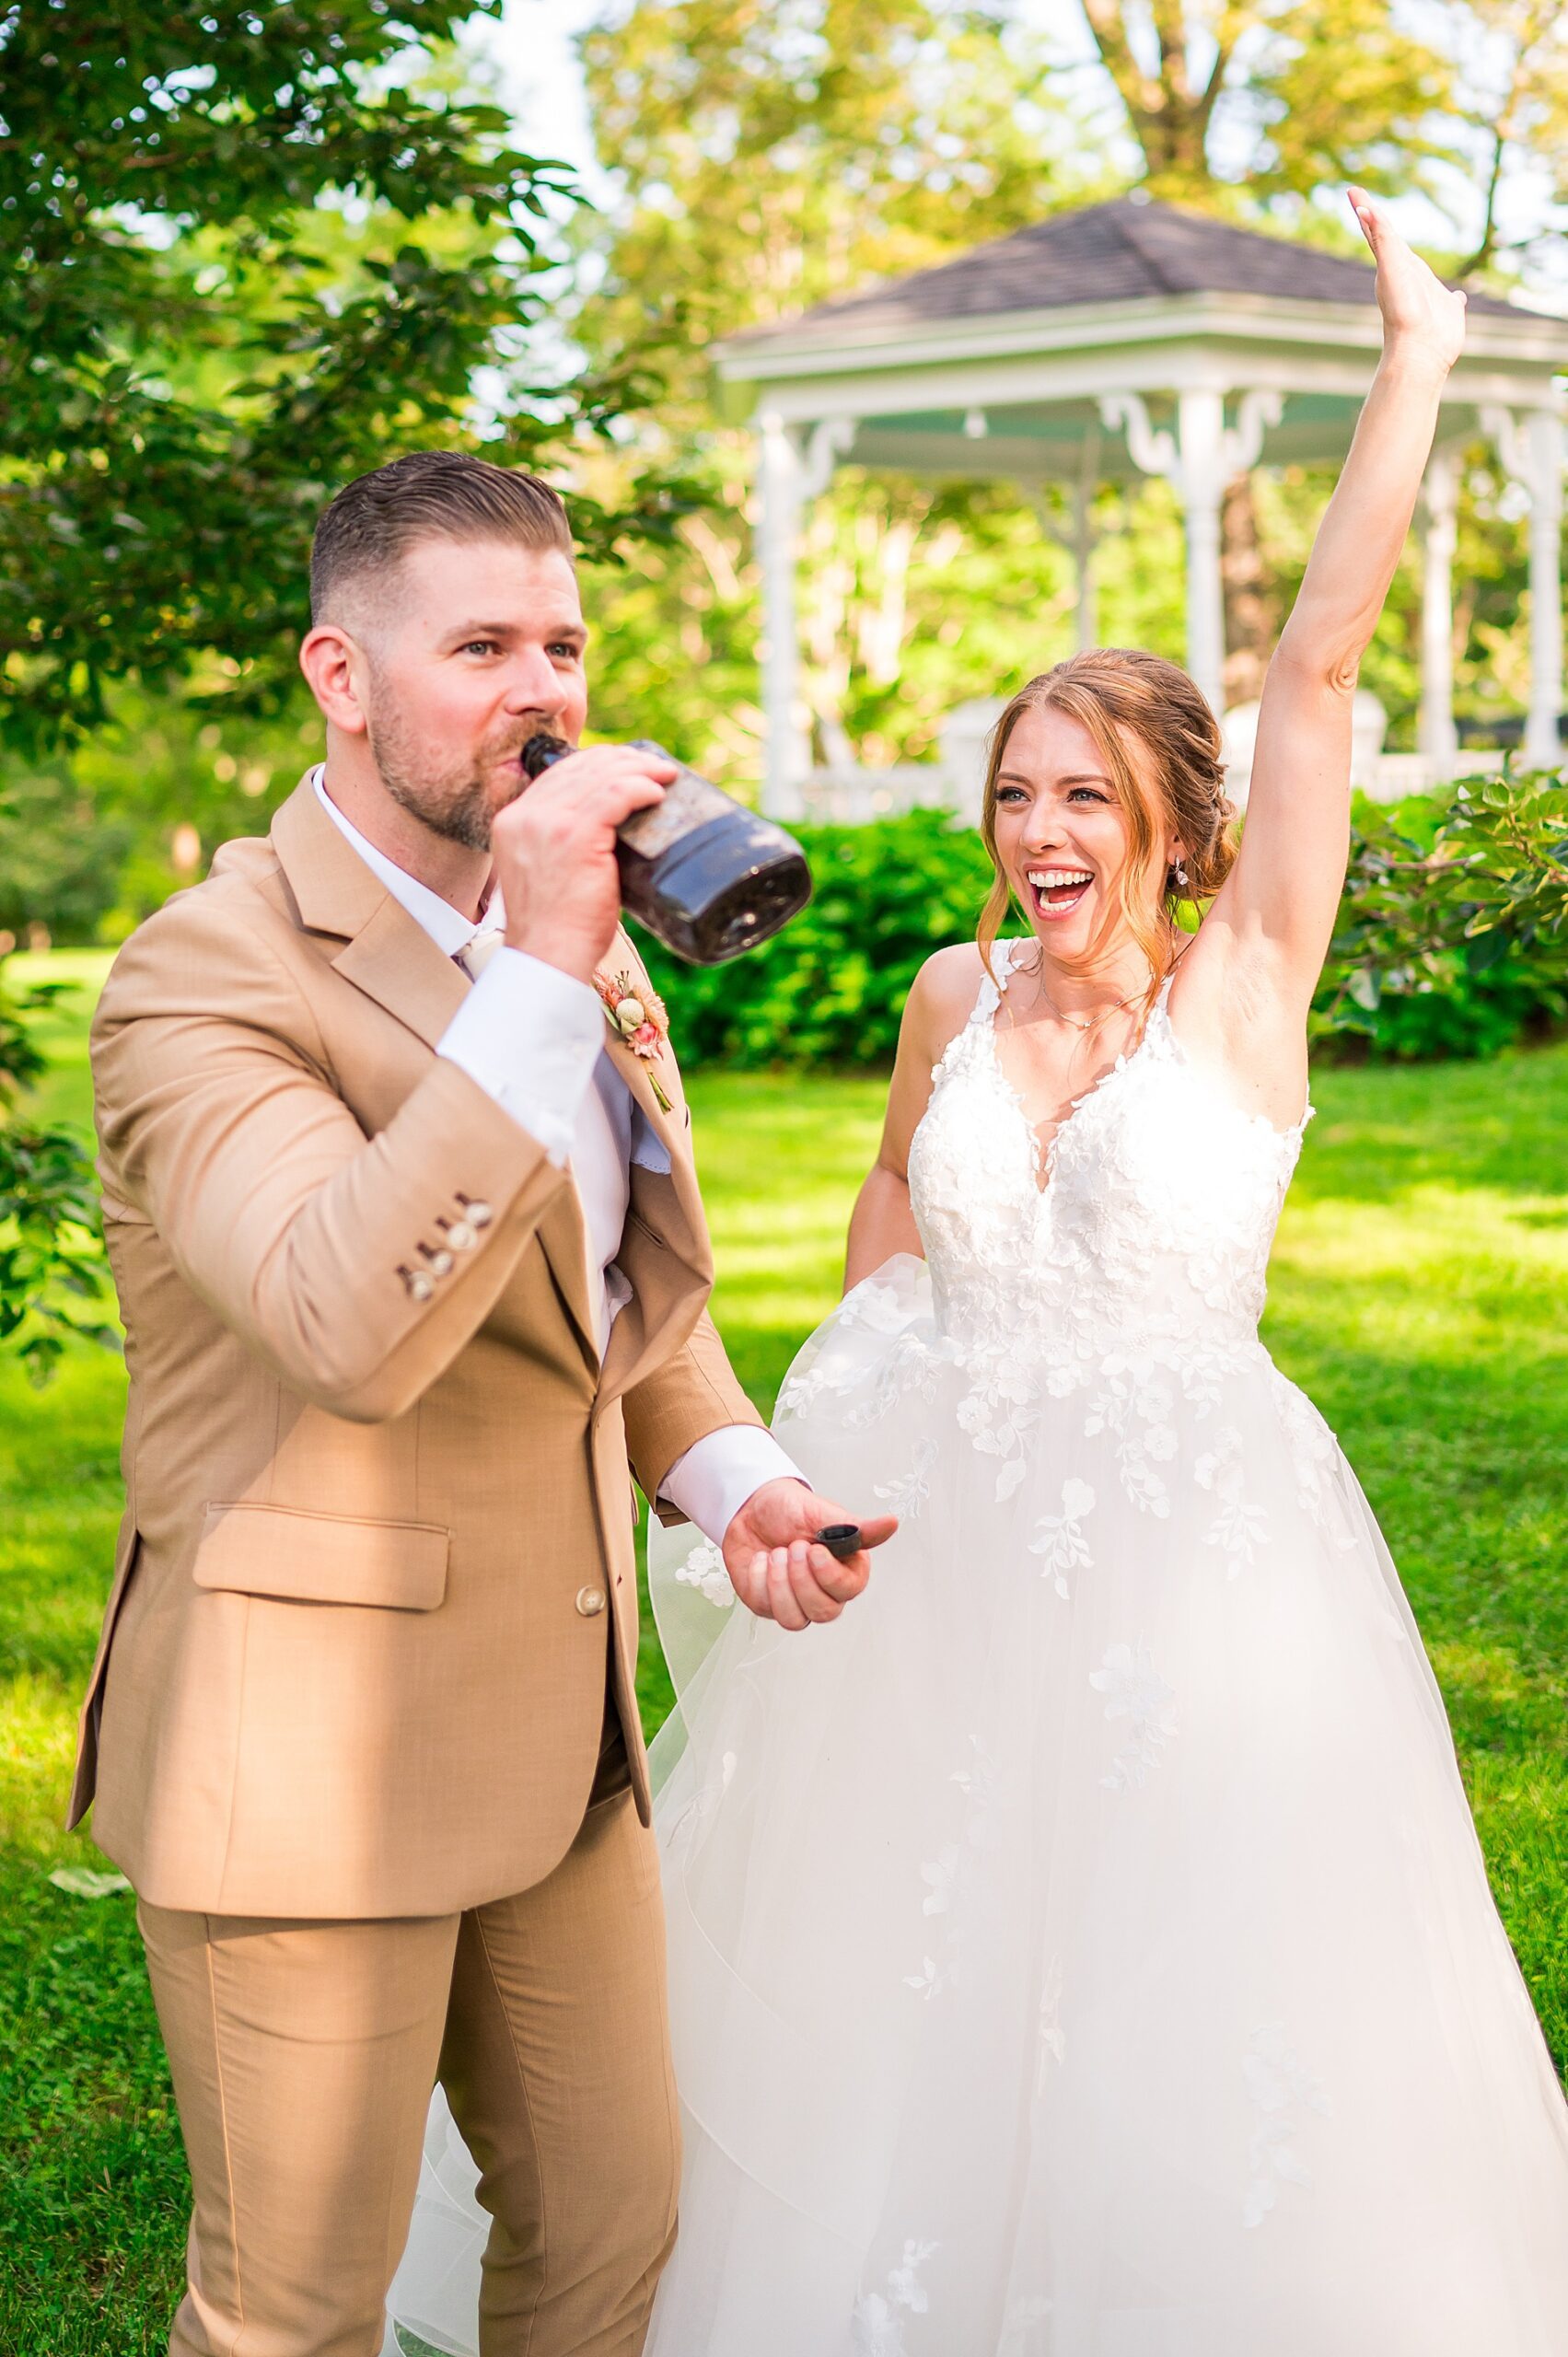 newlyweds drink from bottle of bourbon - a southern wedding tradition 